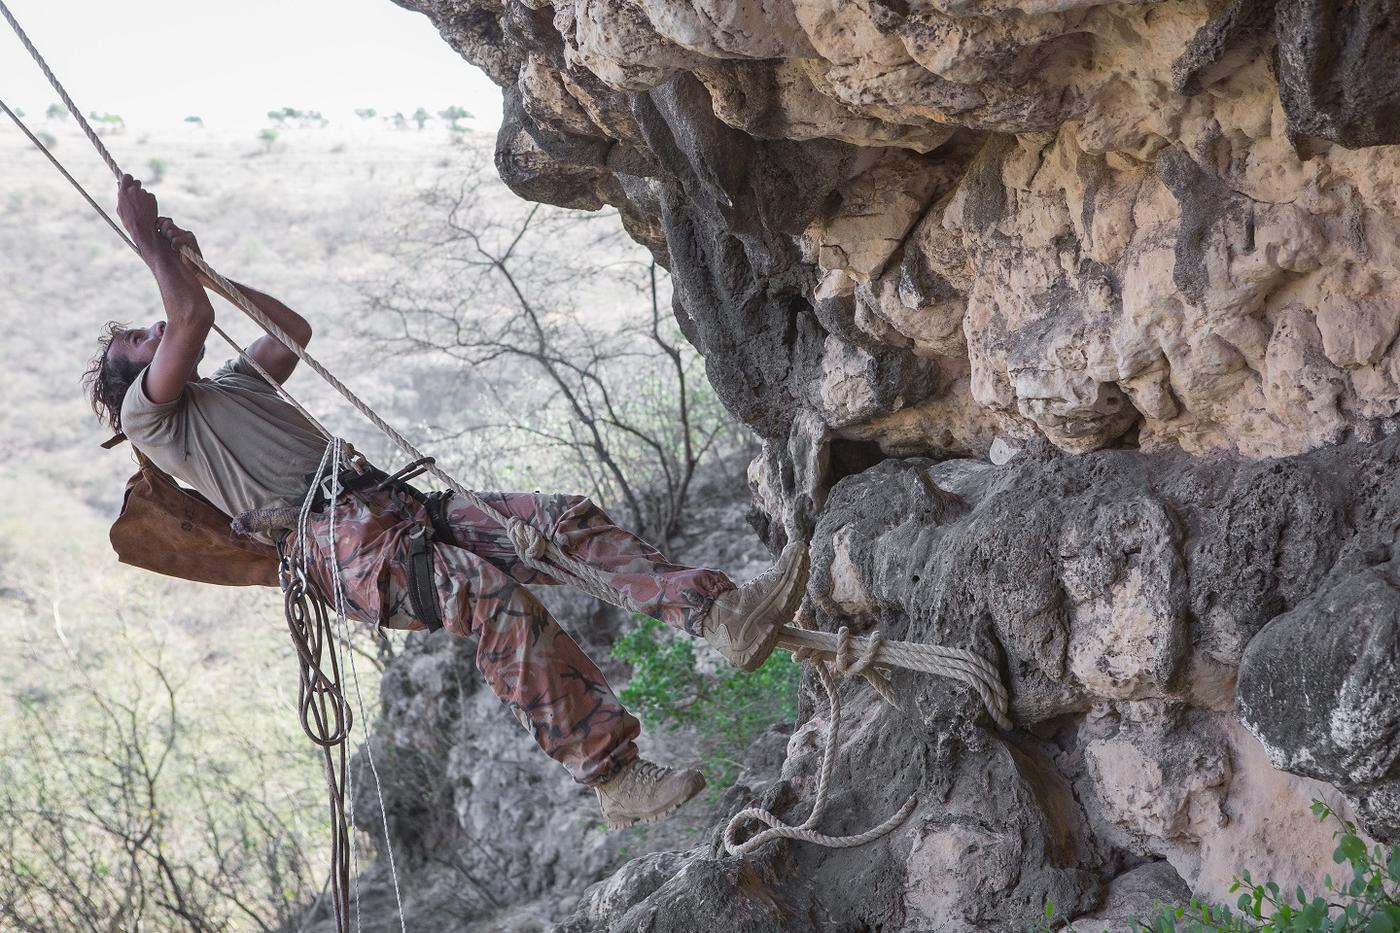 Honey hunter Mohammed Salem Guwas al-Kathery climbs a rocky spur to collect natural hives embedded in the cliff in Wadi Sheer (MEE/Sebastian Castelier)